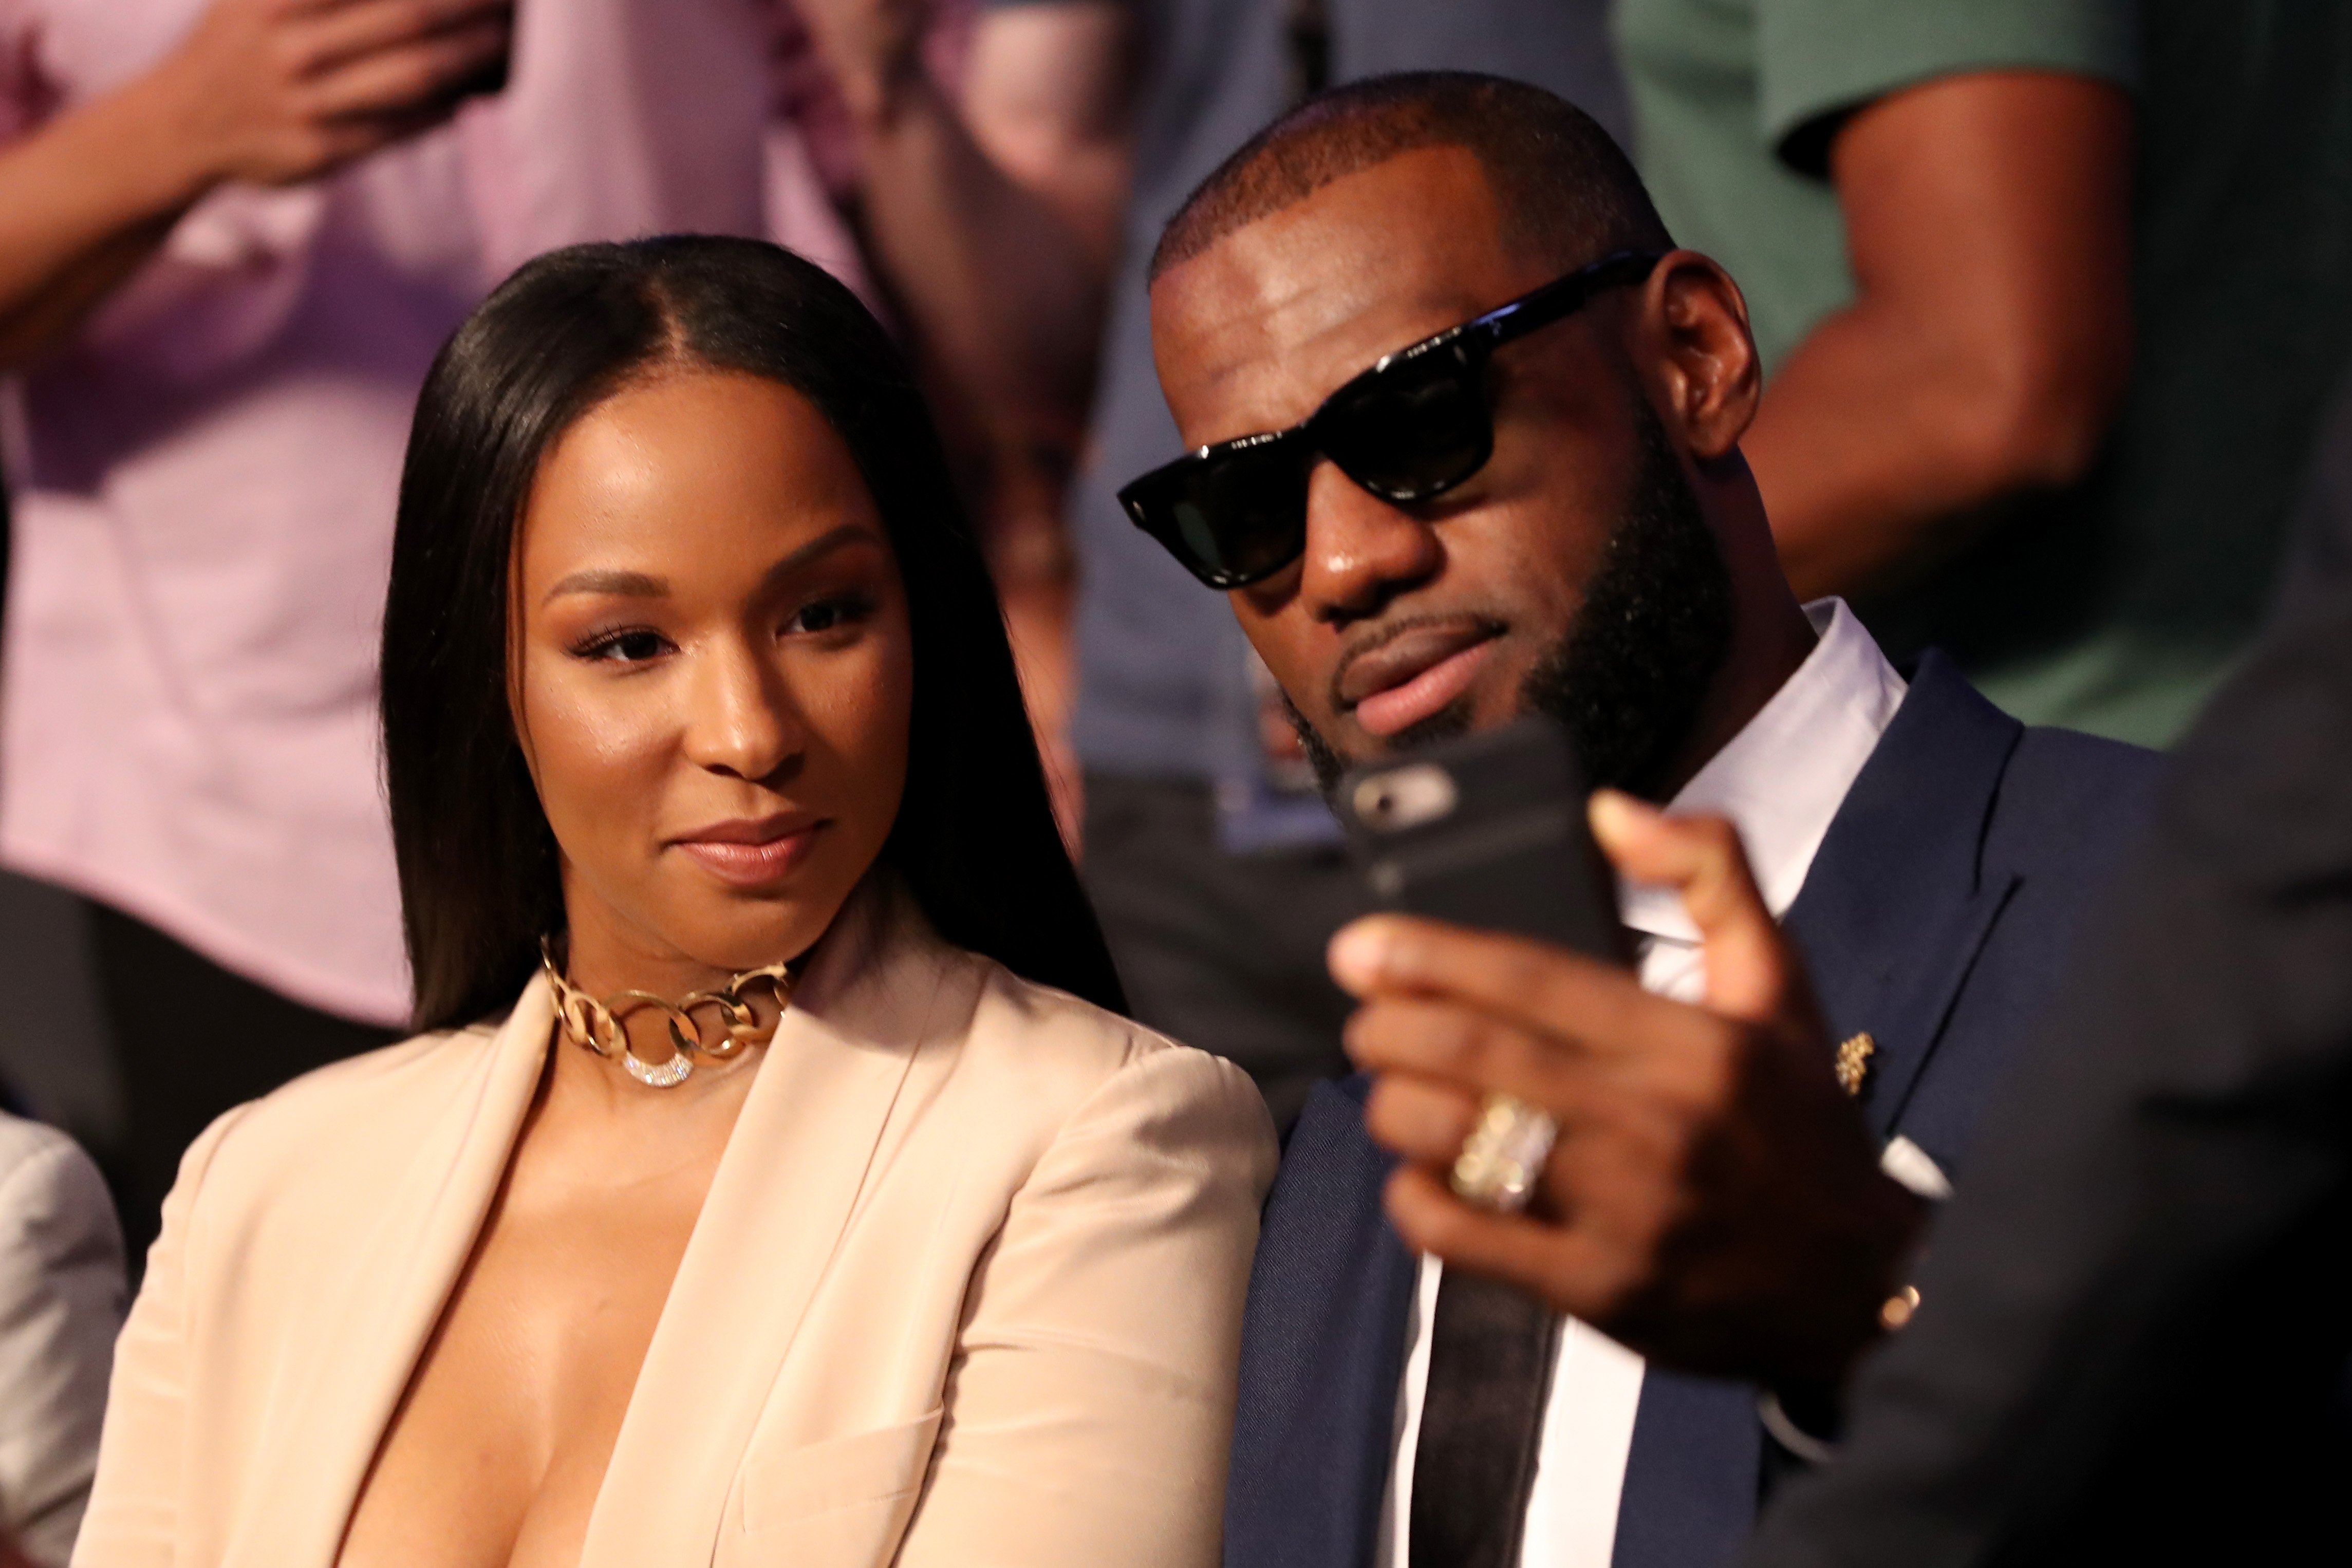 Lebron and Savannah James attend the super welterweight boxing match between Floyd Mayweather Jr. and Conor McGregor on August 26, 2017, at T-Mobile Arena in Las Vegas, Nevada. | Source: Getty Images